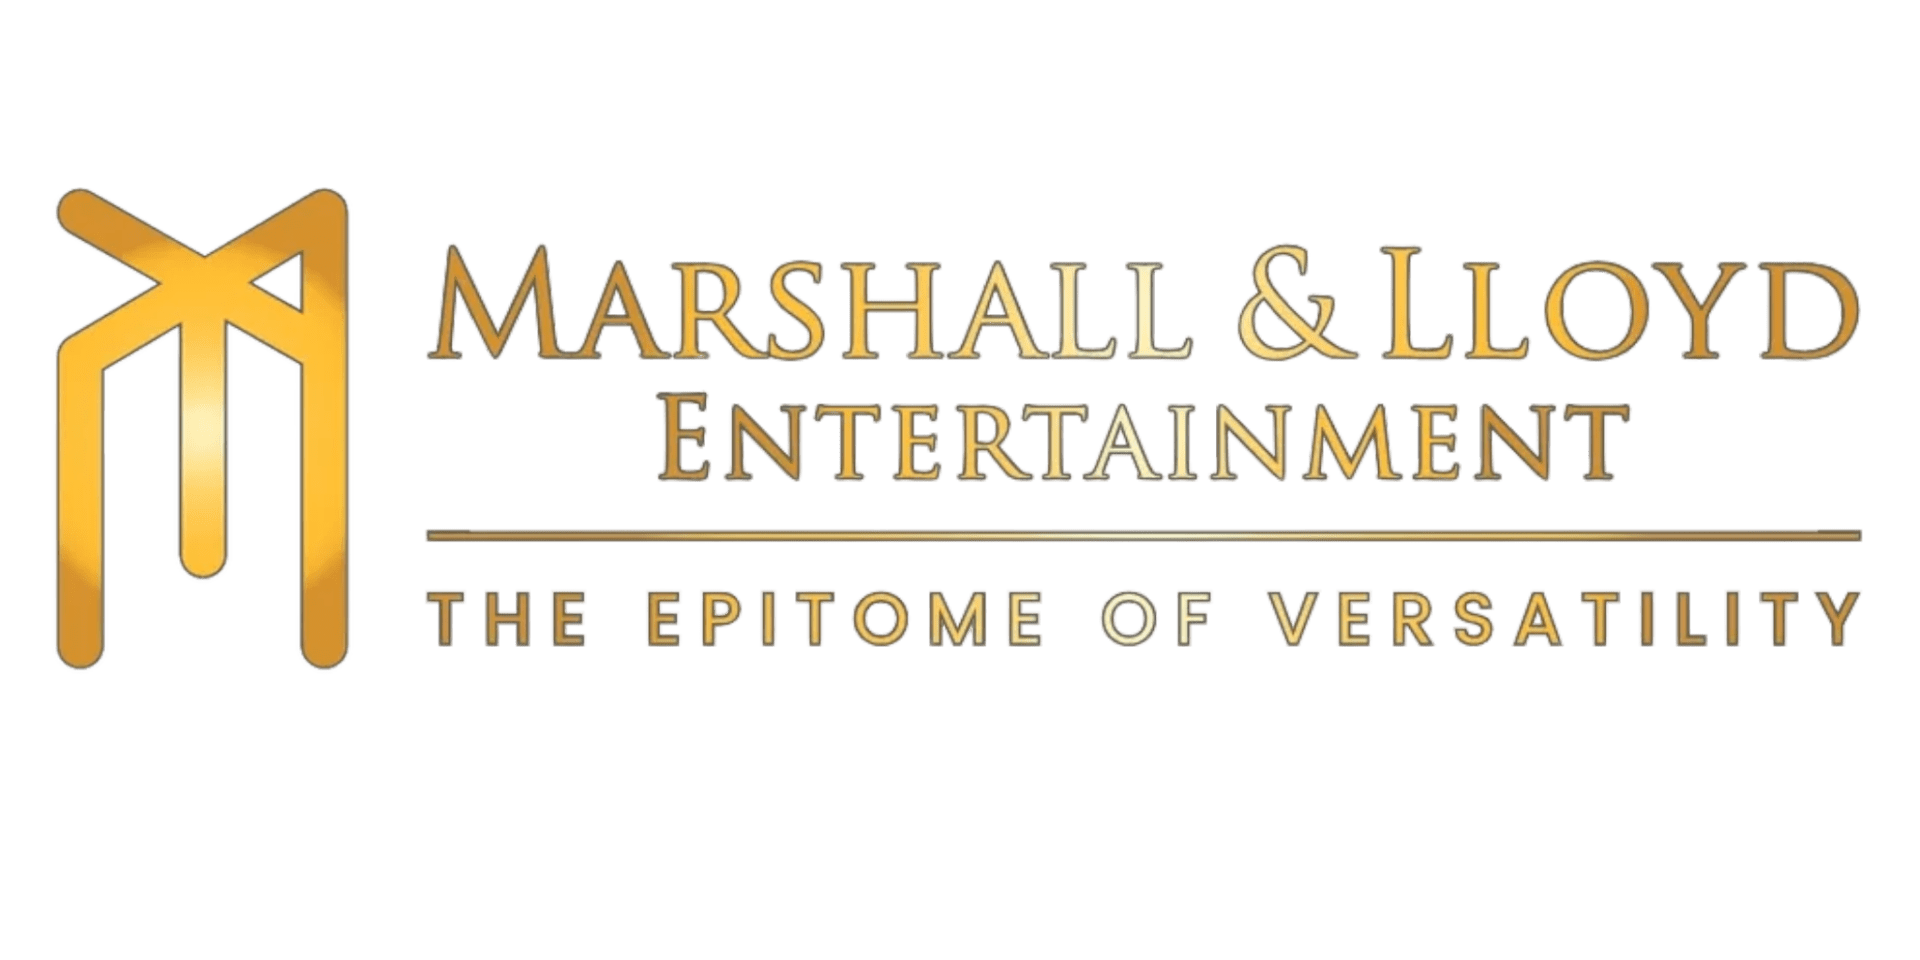 A logo for marshall & lewis entertainment.